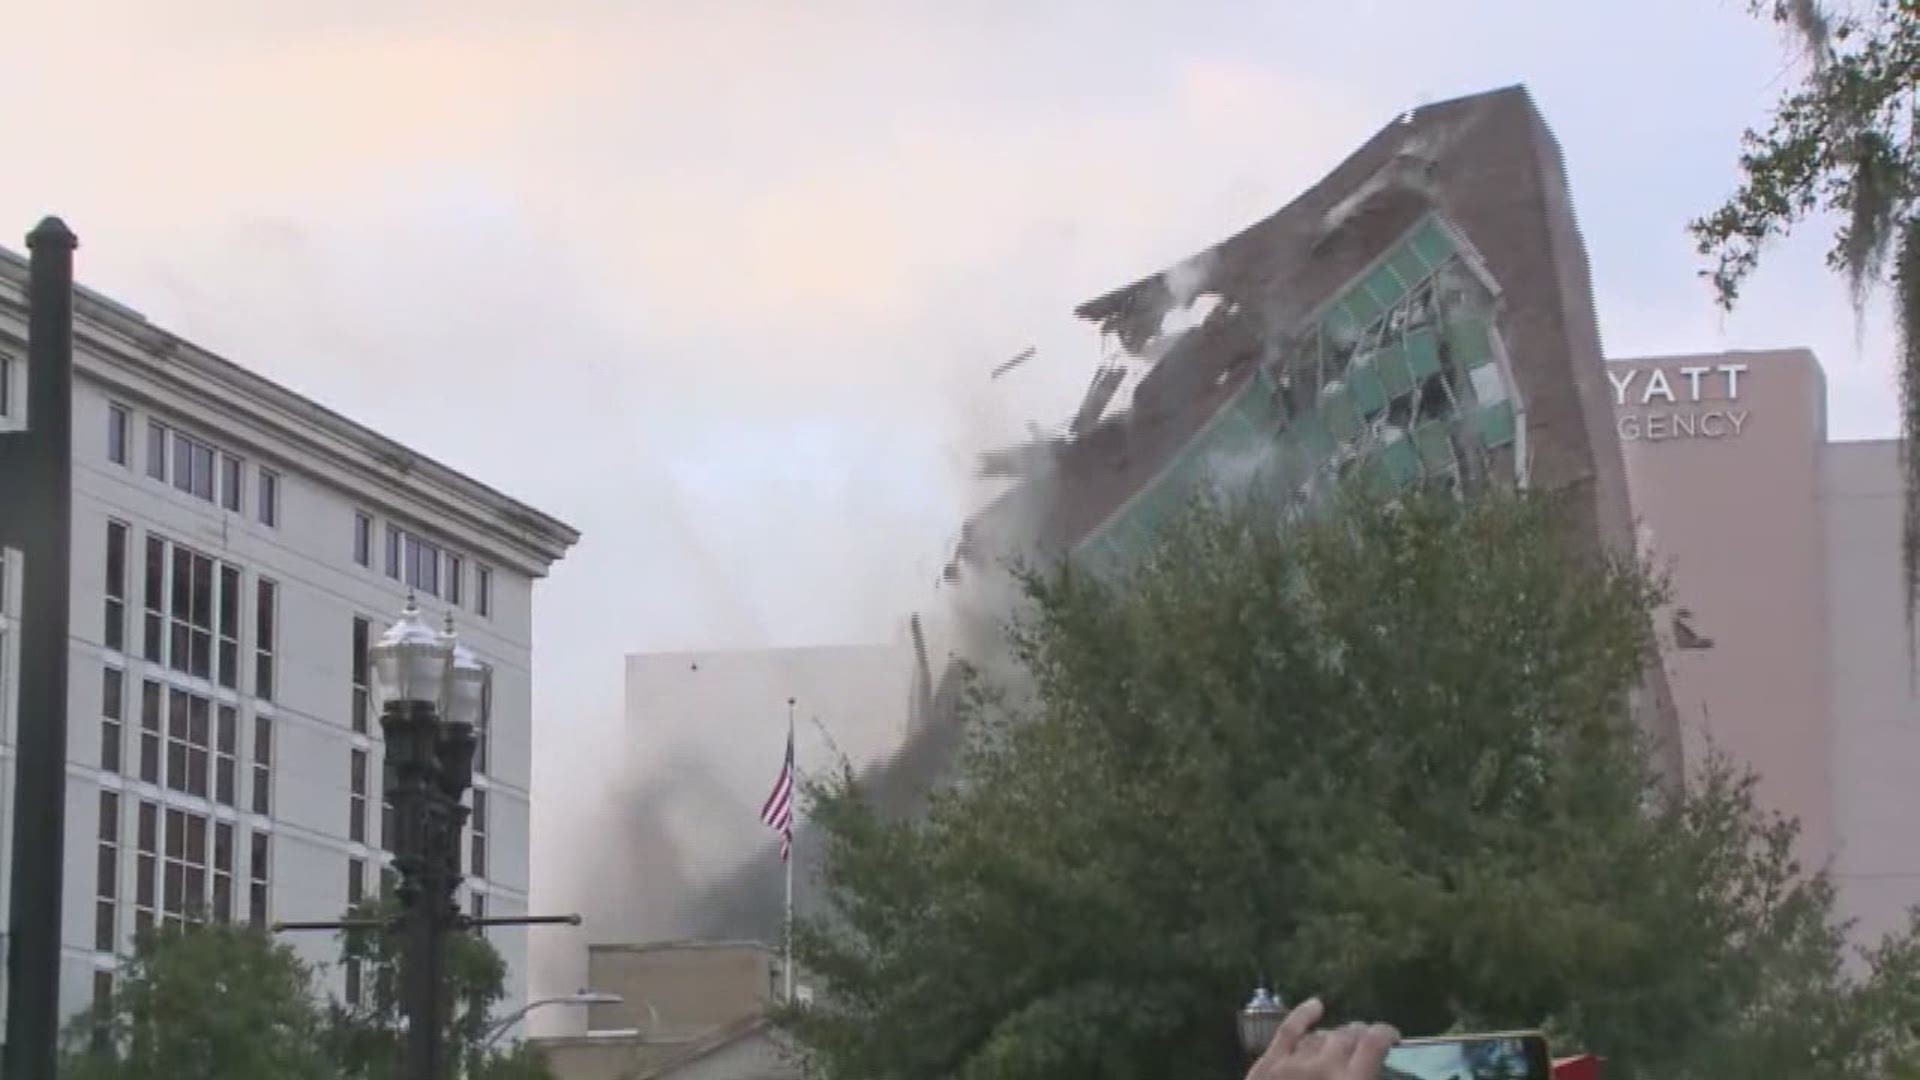 The nearly 60-year-old building came down successfully, changing Jacksonville's skyline forever.